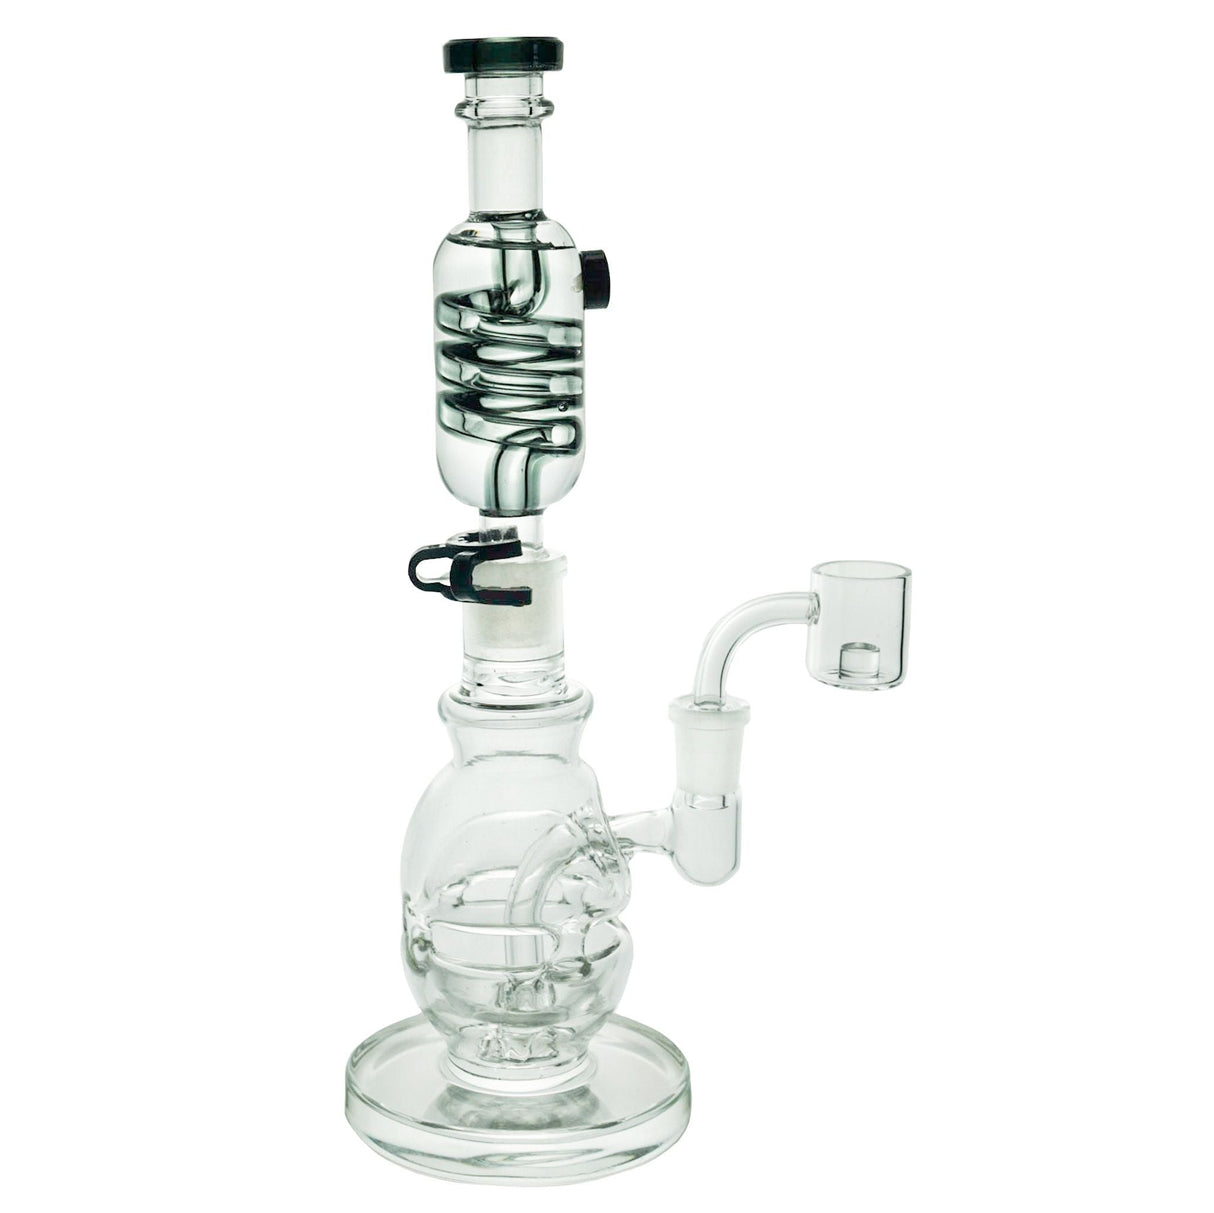 Freeze Pipe Mini Rig front view on white background, portable glass water pipe with glycerin coil